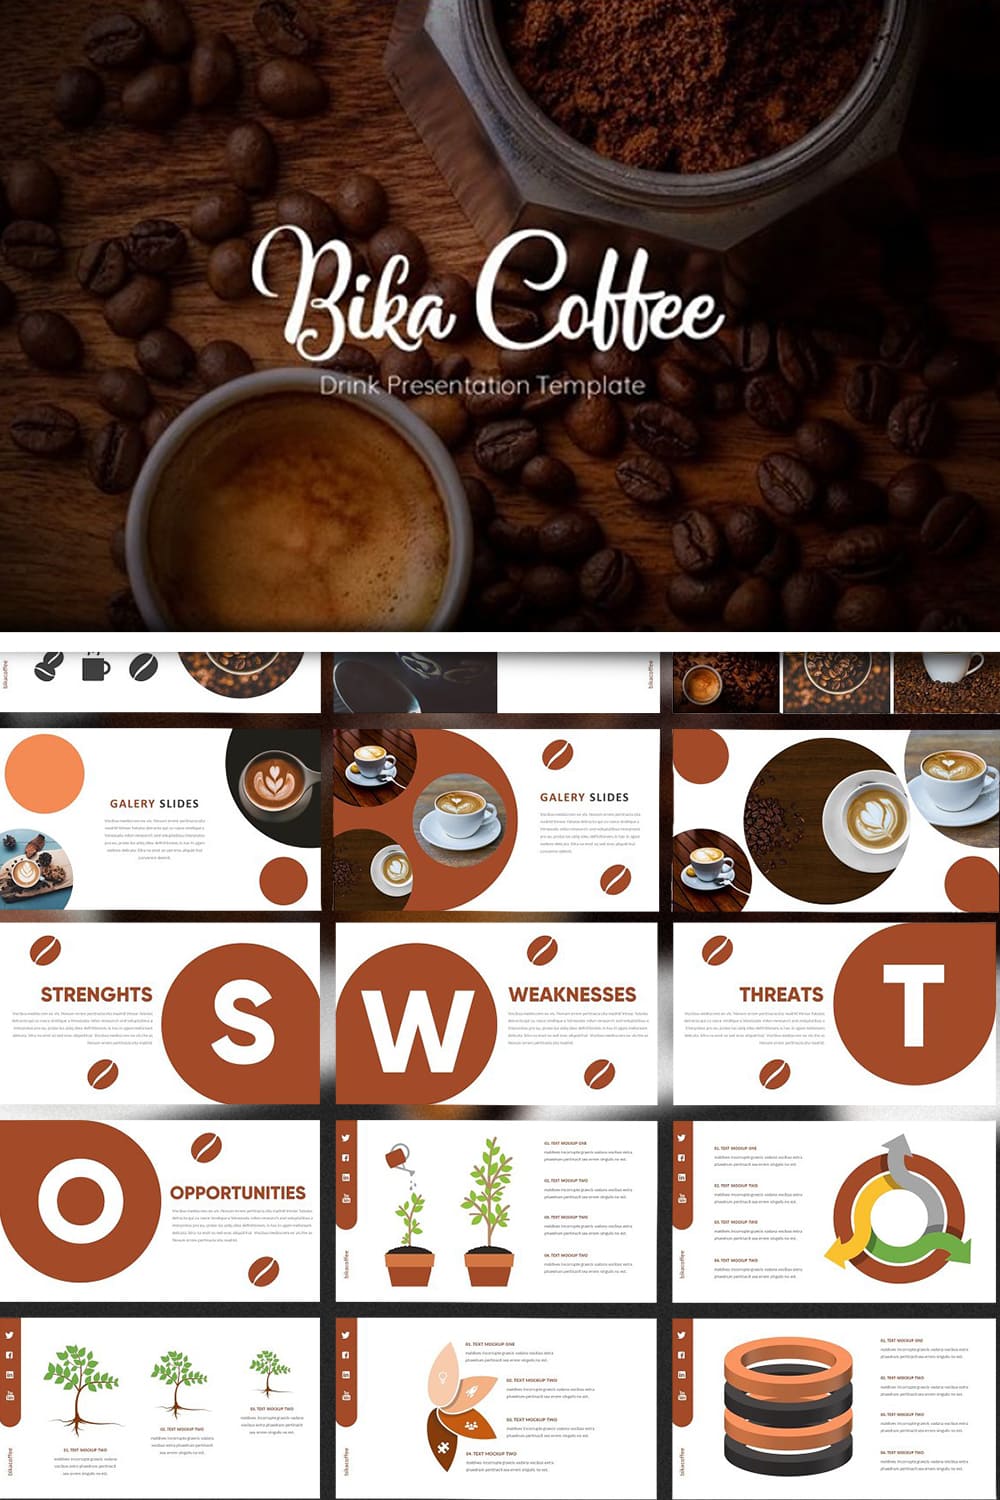 Bika Coffee - Coffee Addict Google Slides Template is a multipurpose Google Slides template that can be used for any type of presentation.